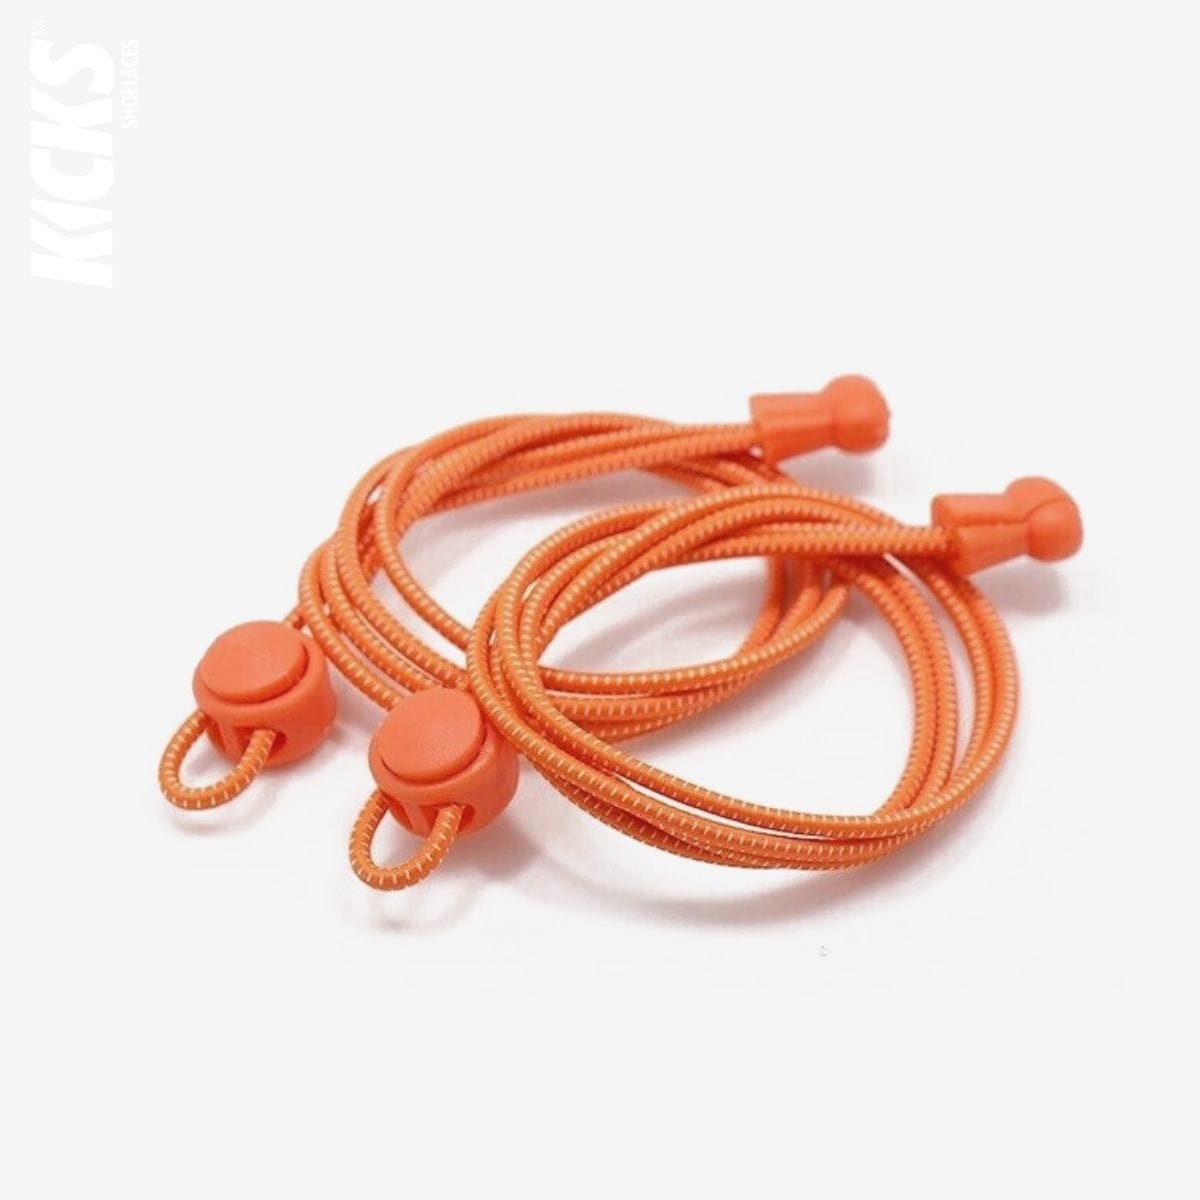 orange-no-tie elastic-running-shoelaces-with-matching-lace-locks-by-kicks-shoelaces